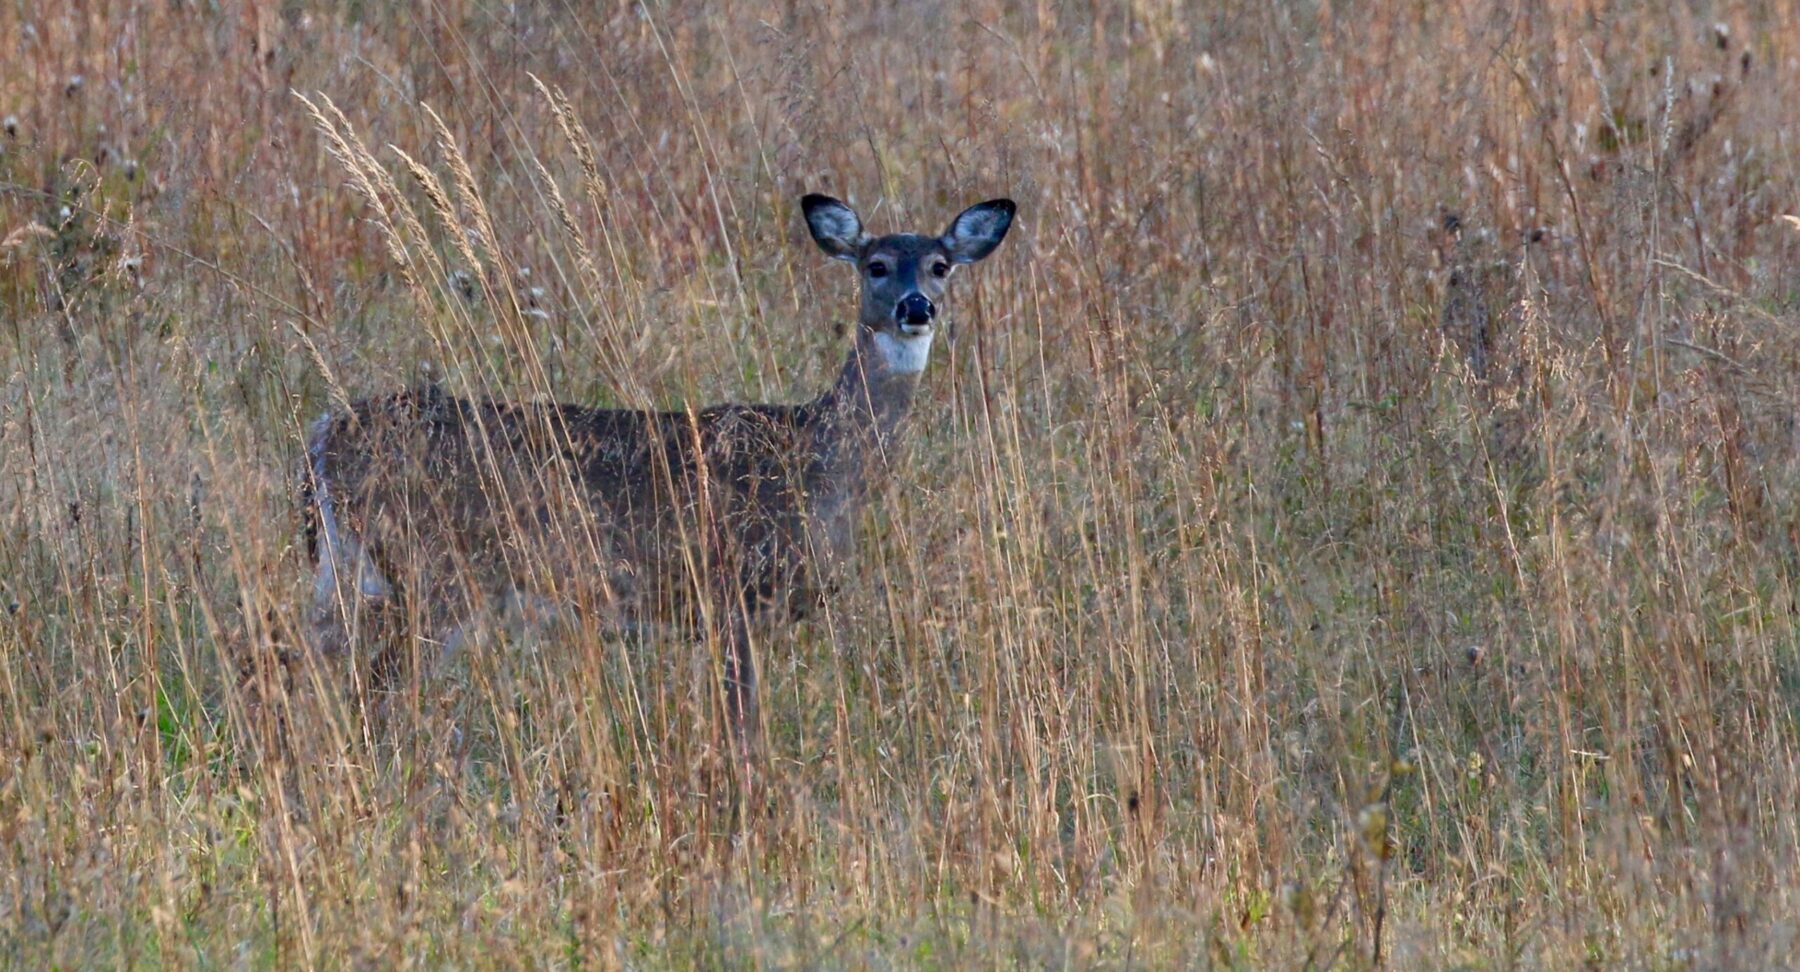 Female white-tailed deer standing in a field